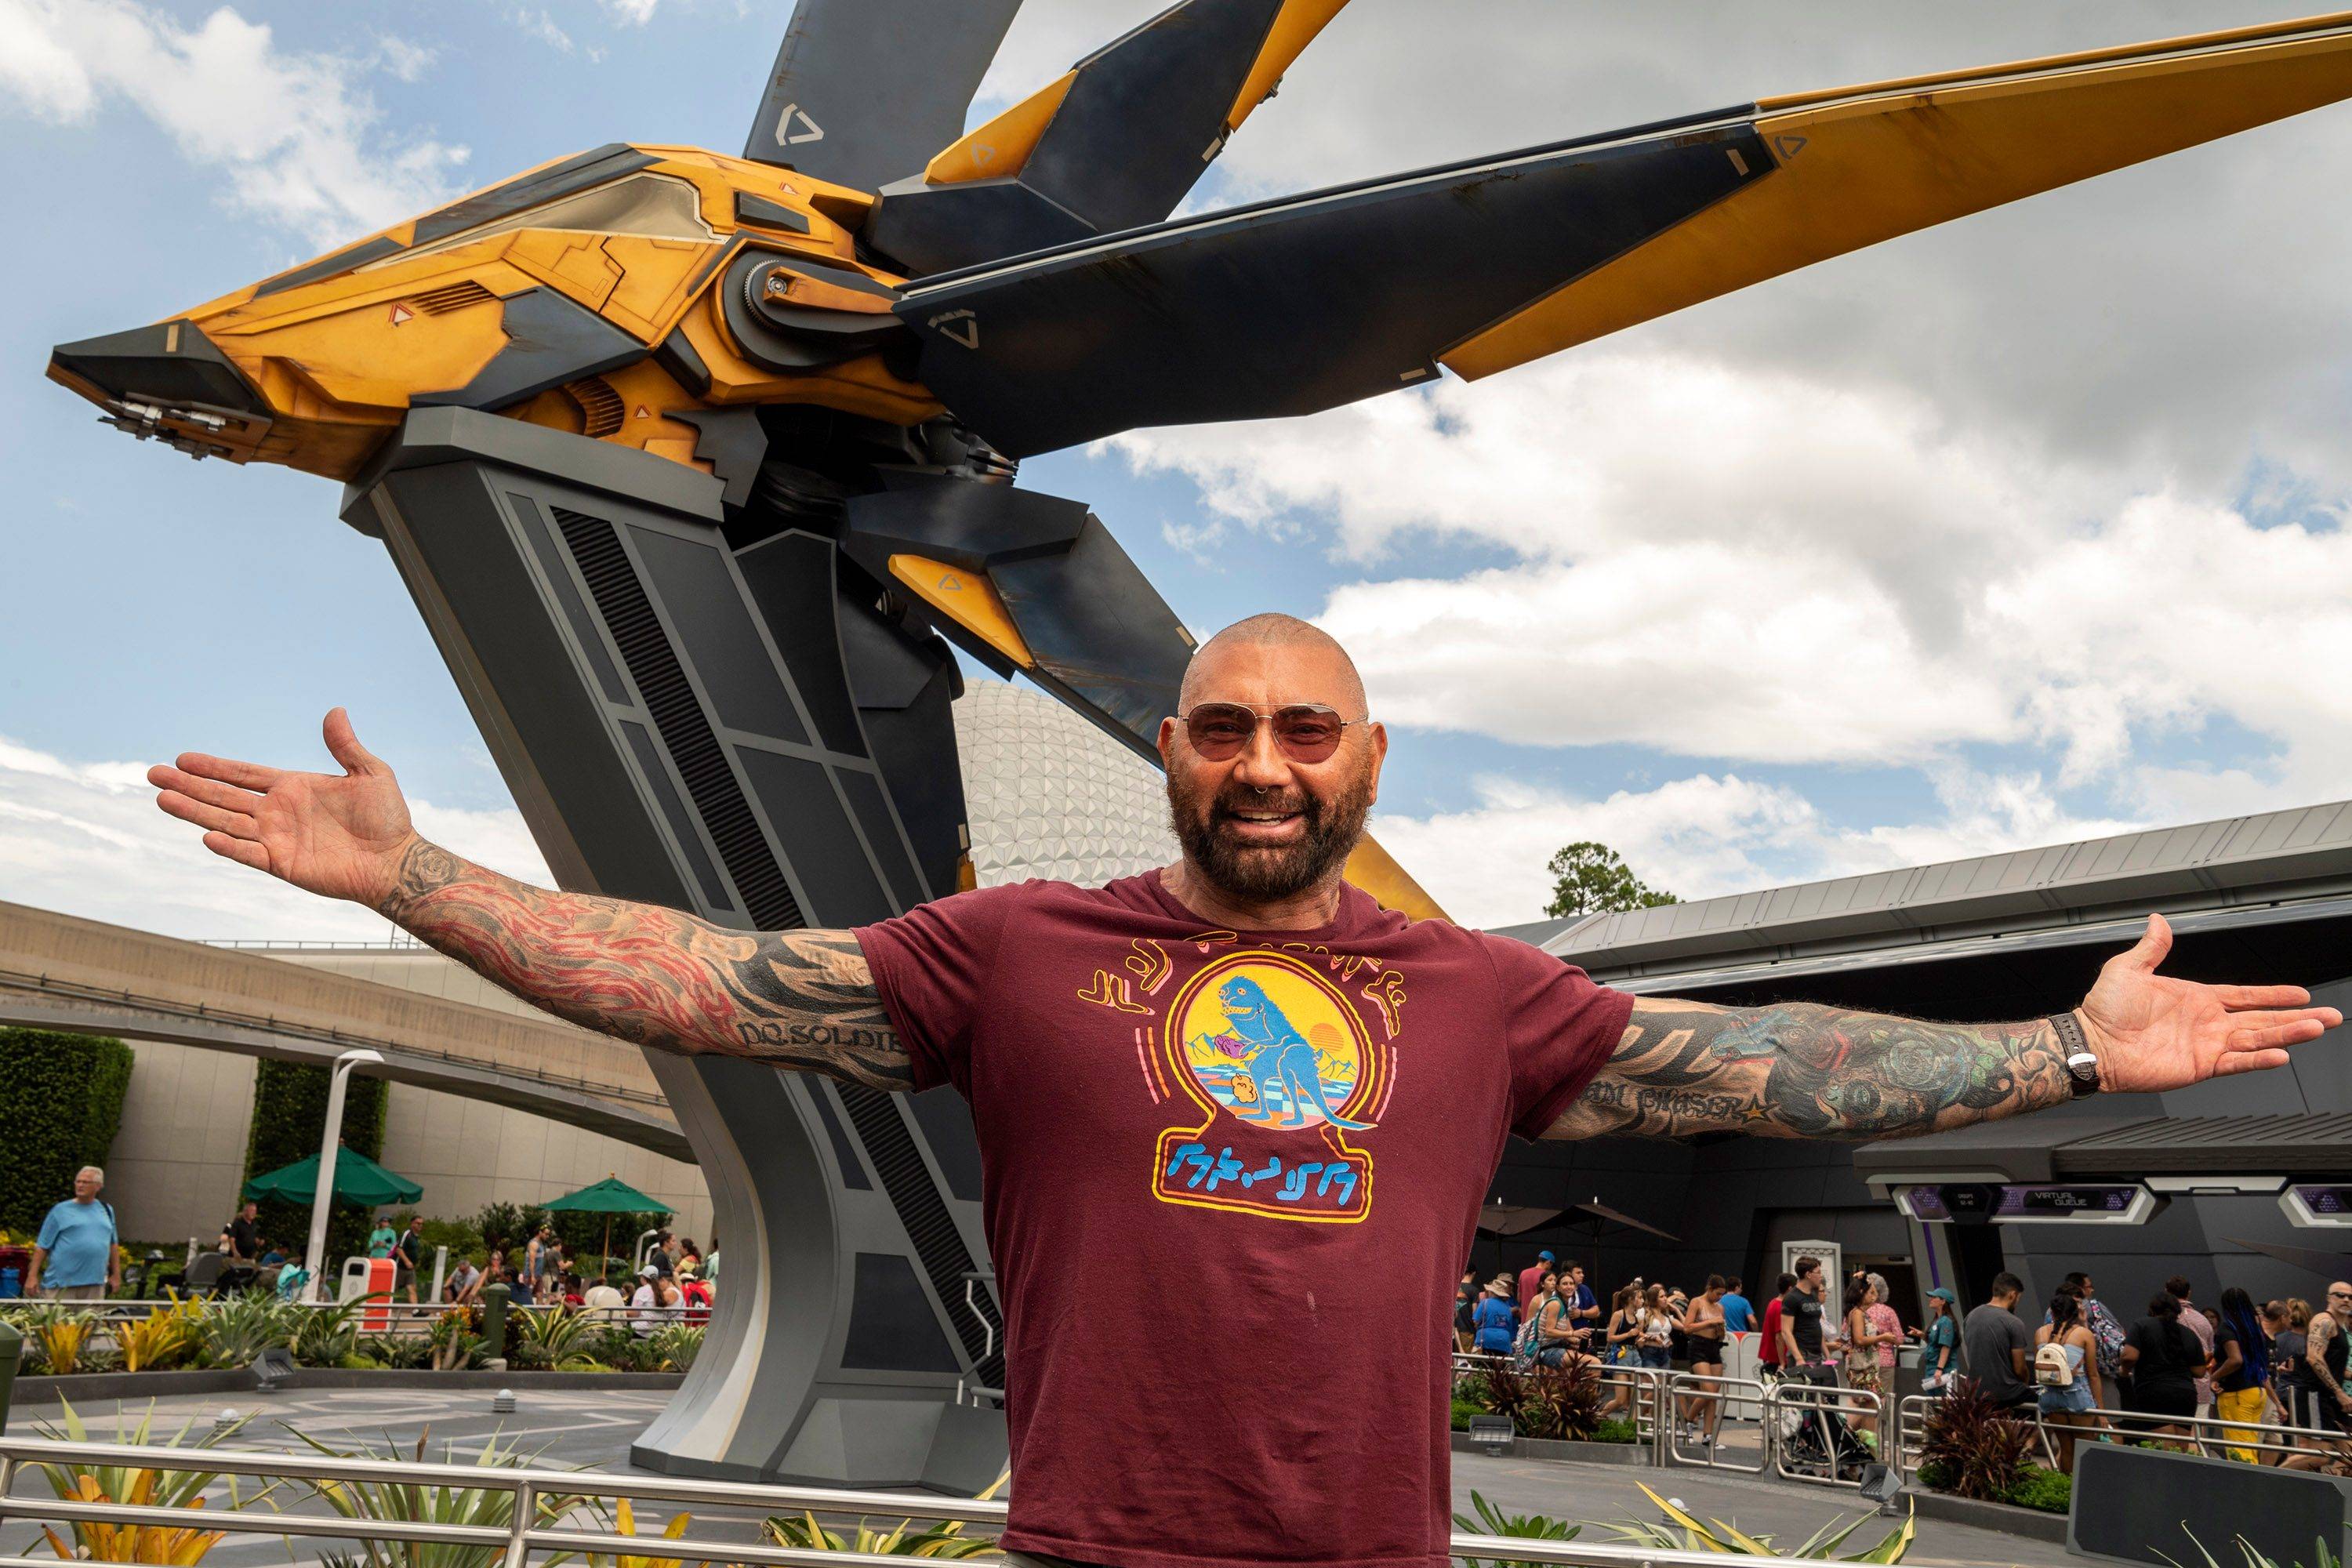 Dave Bautista experiences Guardians of the Galaxy: Cosmic Rewind at EPCOT